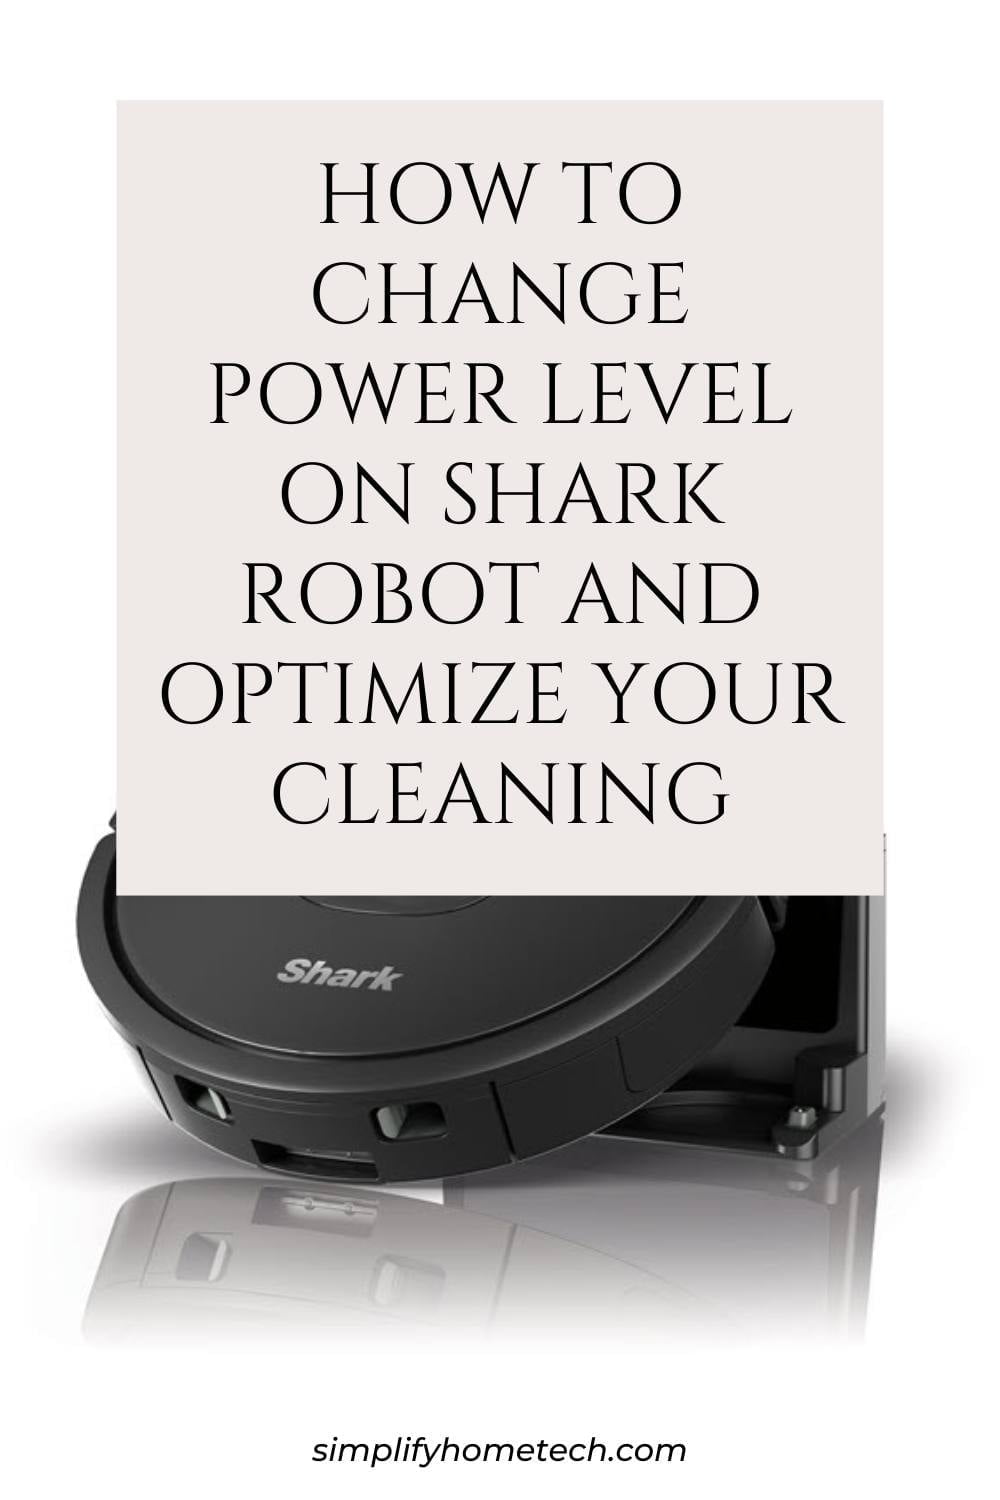 How to Change Power Level on Shark Robot and Optimize Your Cleaning